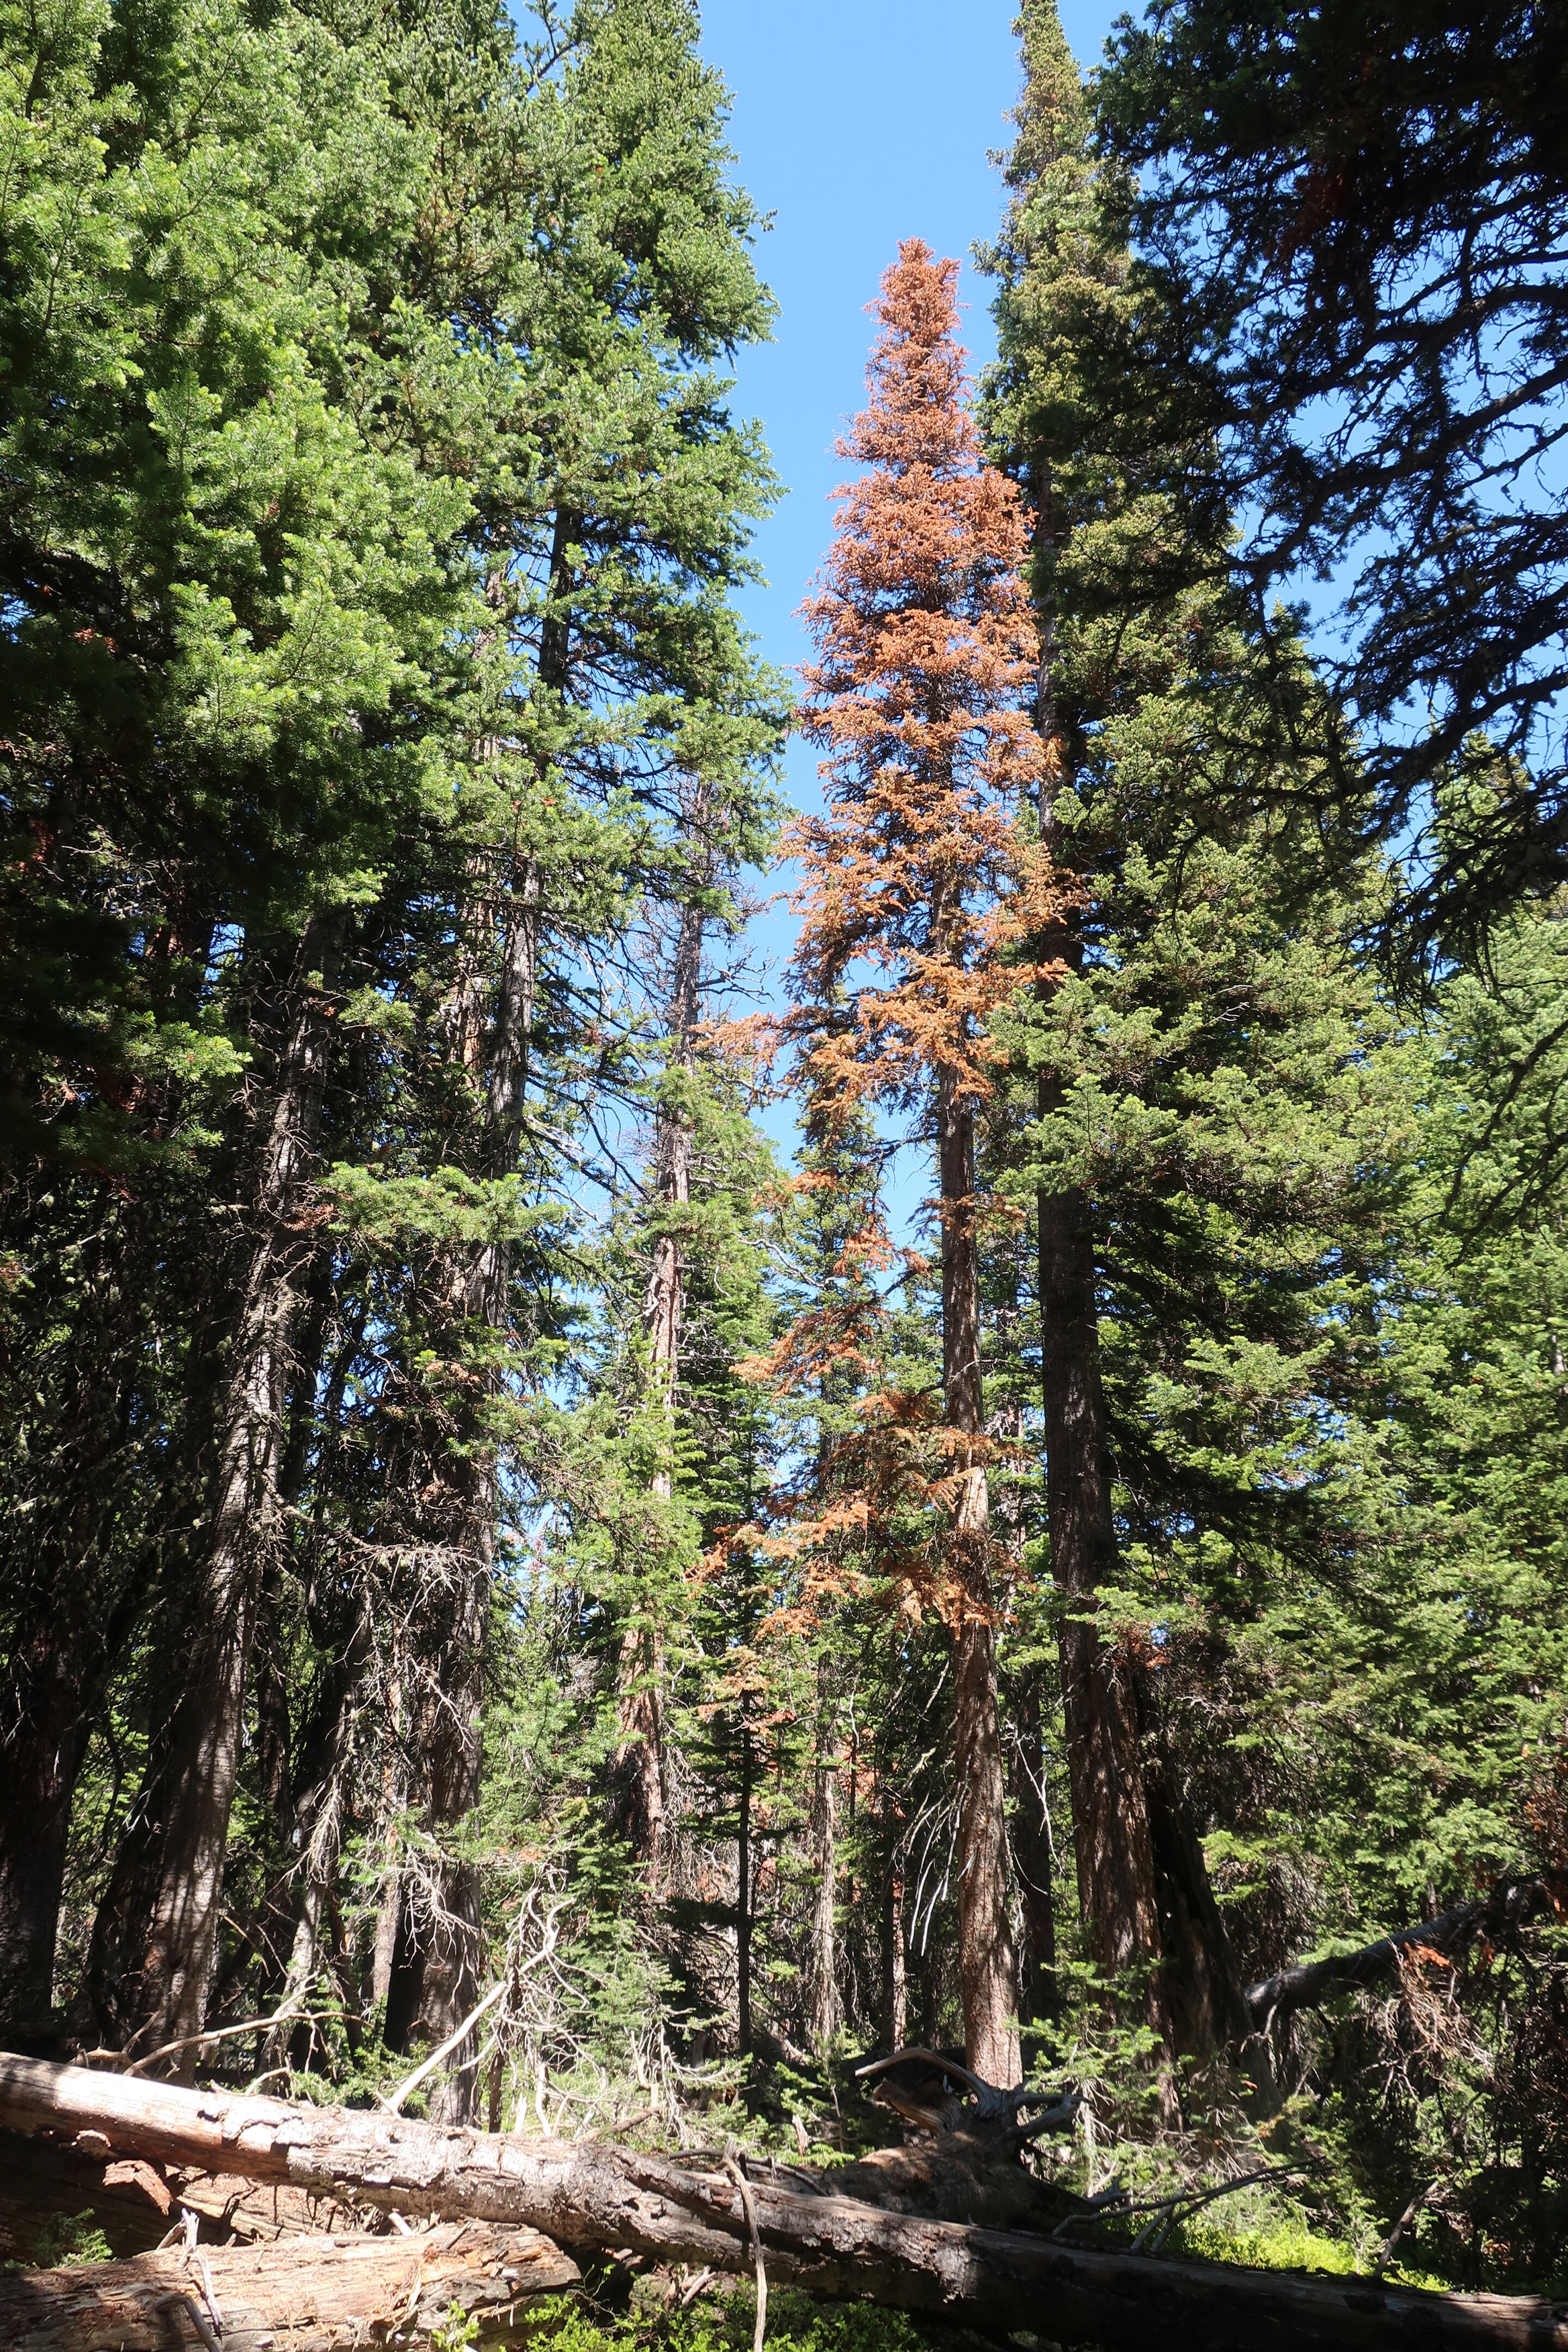 Extreme heat, dry summers main cause of tree death in Colorado's subalpine fores..